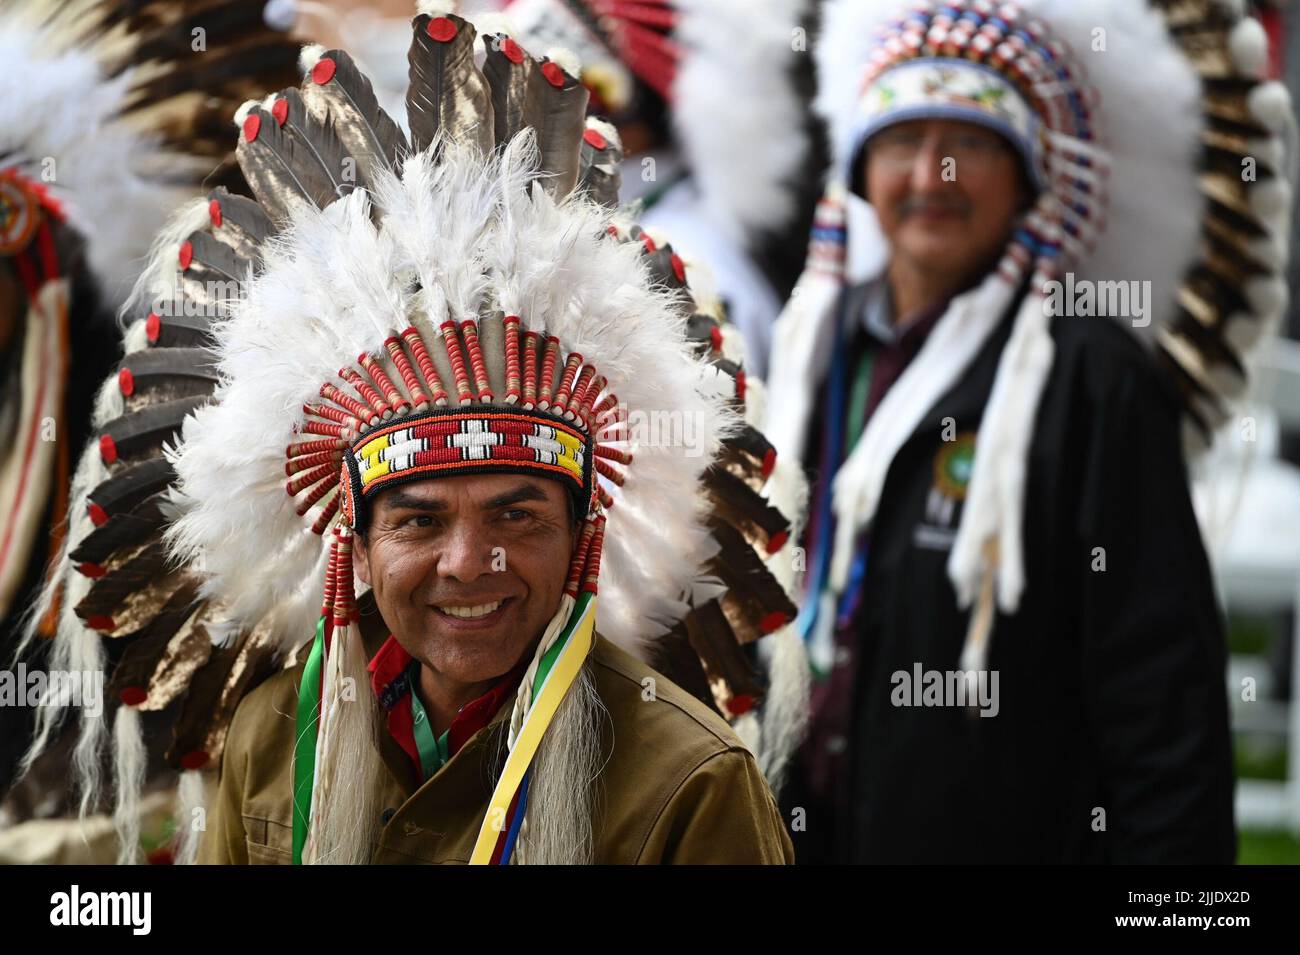 Maskwacis, Canada. 25th July, 2022. A Canadian native wearing a headdress smiles during Pope Francis' visit as part of his multi-day trip to Canada. Francis is visiting Canada to meet with the country's indigenous people, whose family members once suffered abuse, violence and humiliation in church-run boarding schools. Credit: Johannes Neudecker/dpa/Alamy Live News Stock Photo